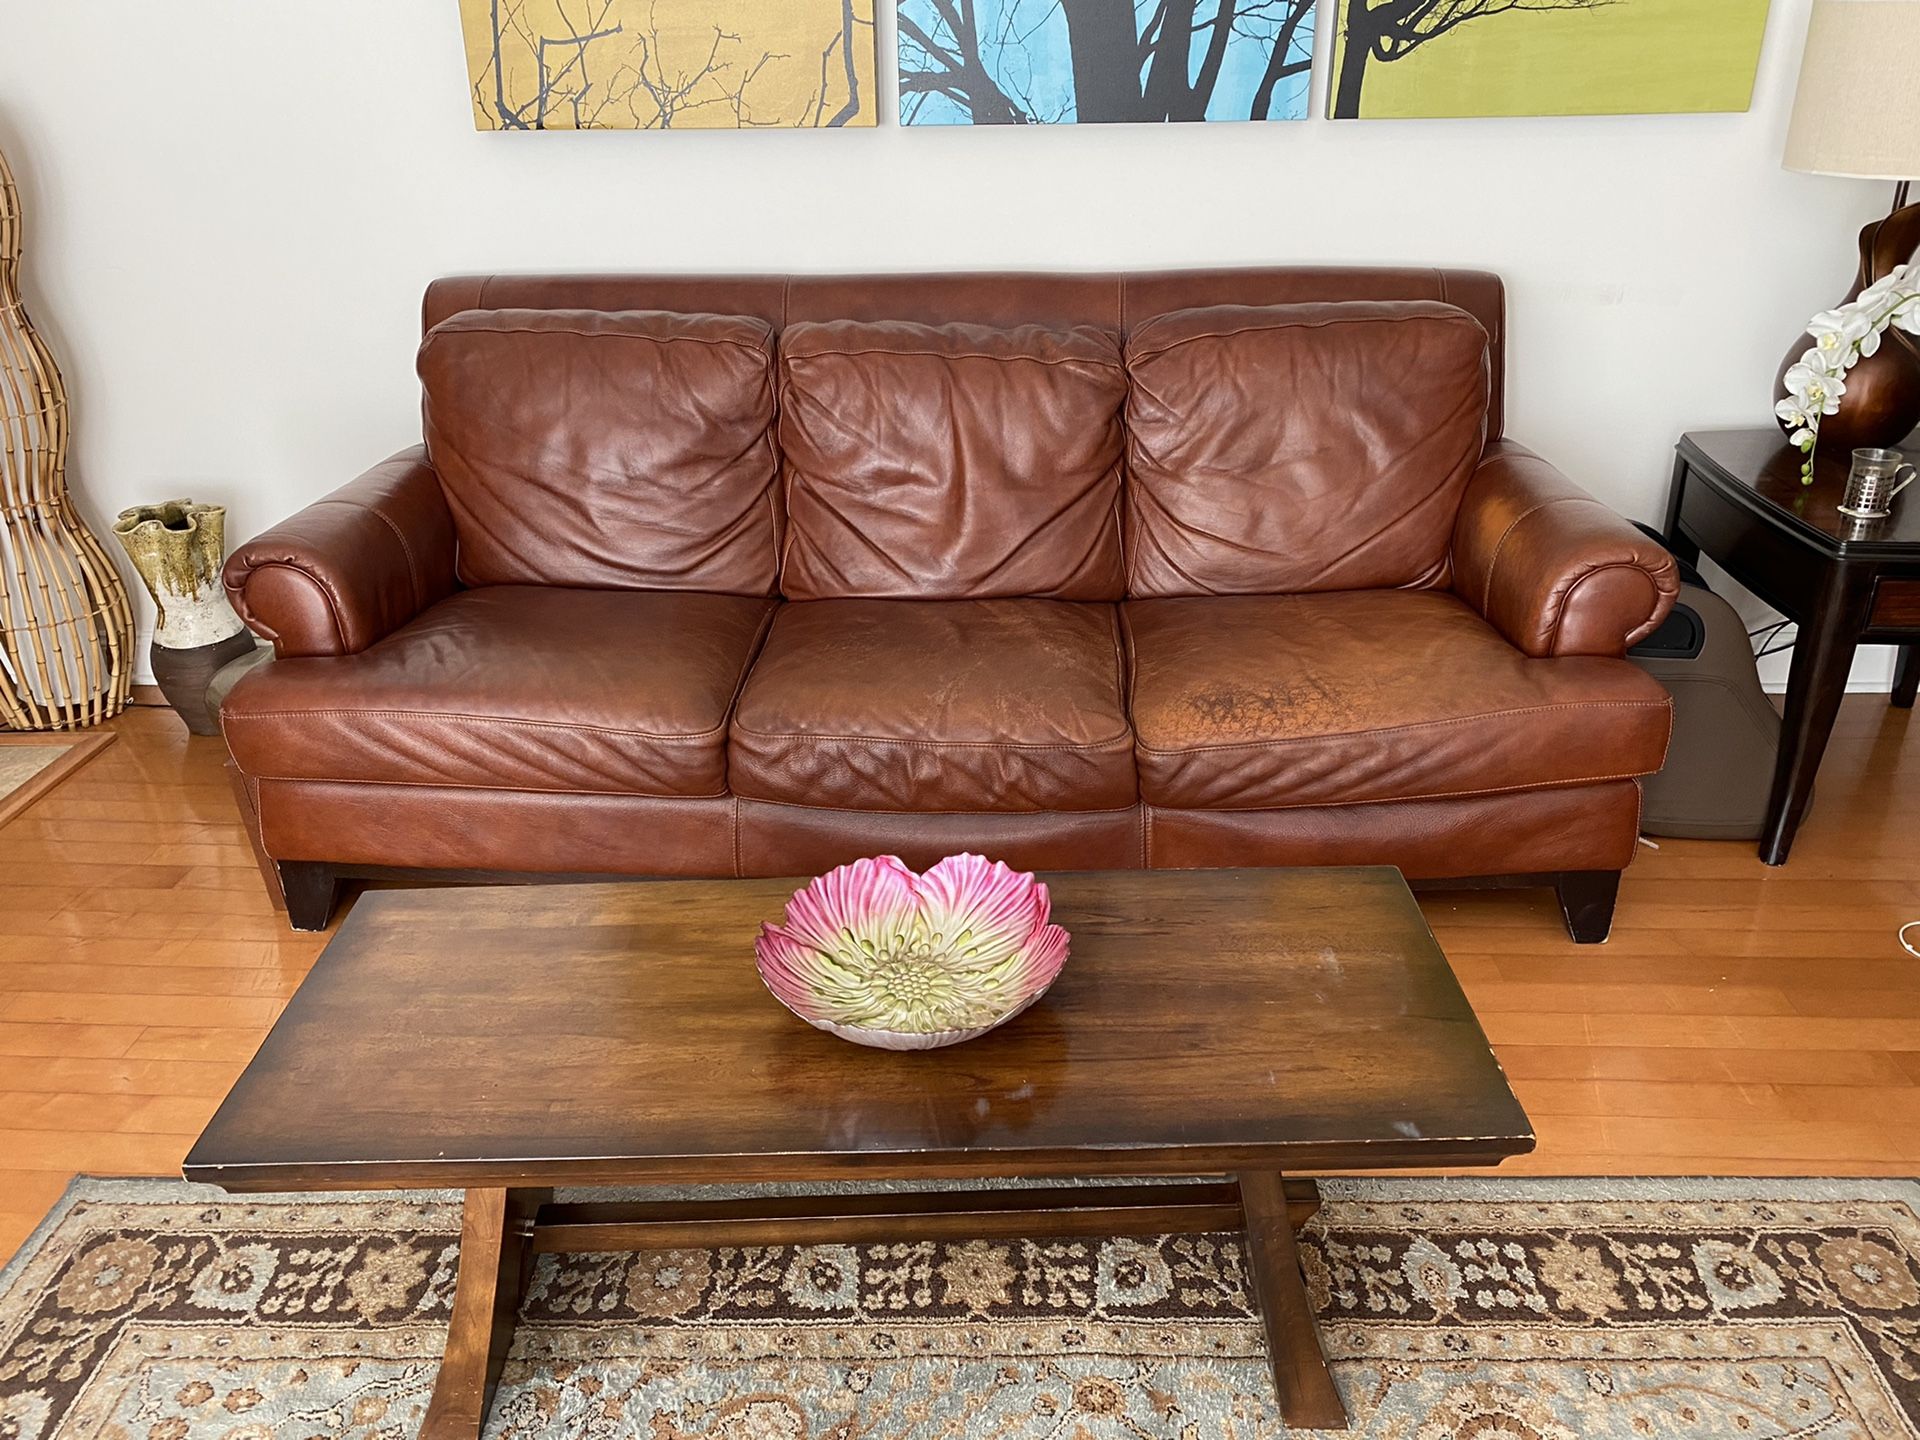 Italian Leather Couch and Coffee Table